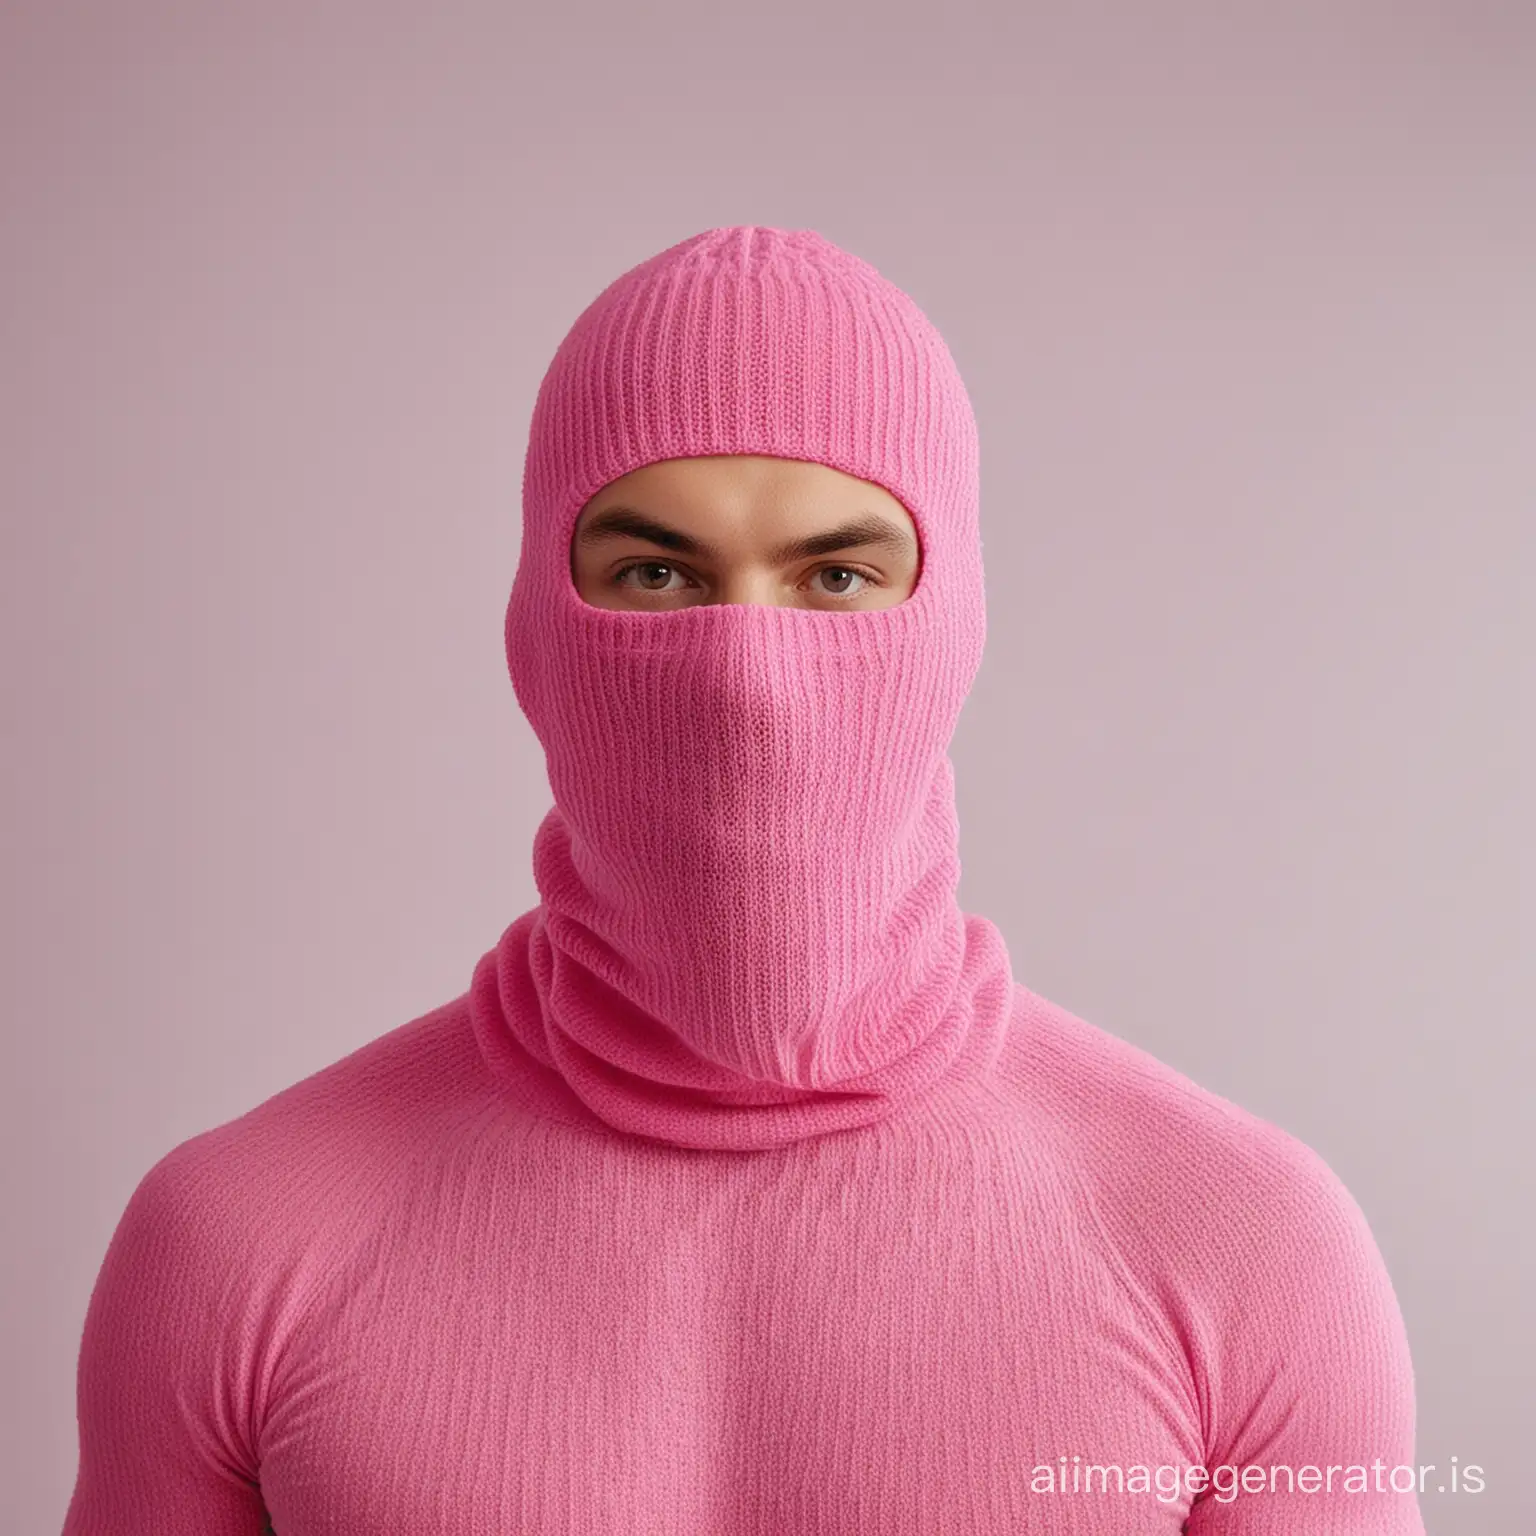 a single sperm cell wrapped around a tall hunk man wearing a pink balaclava